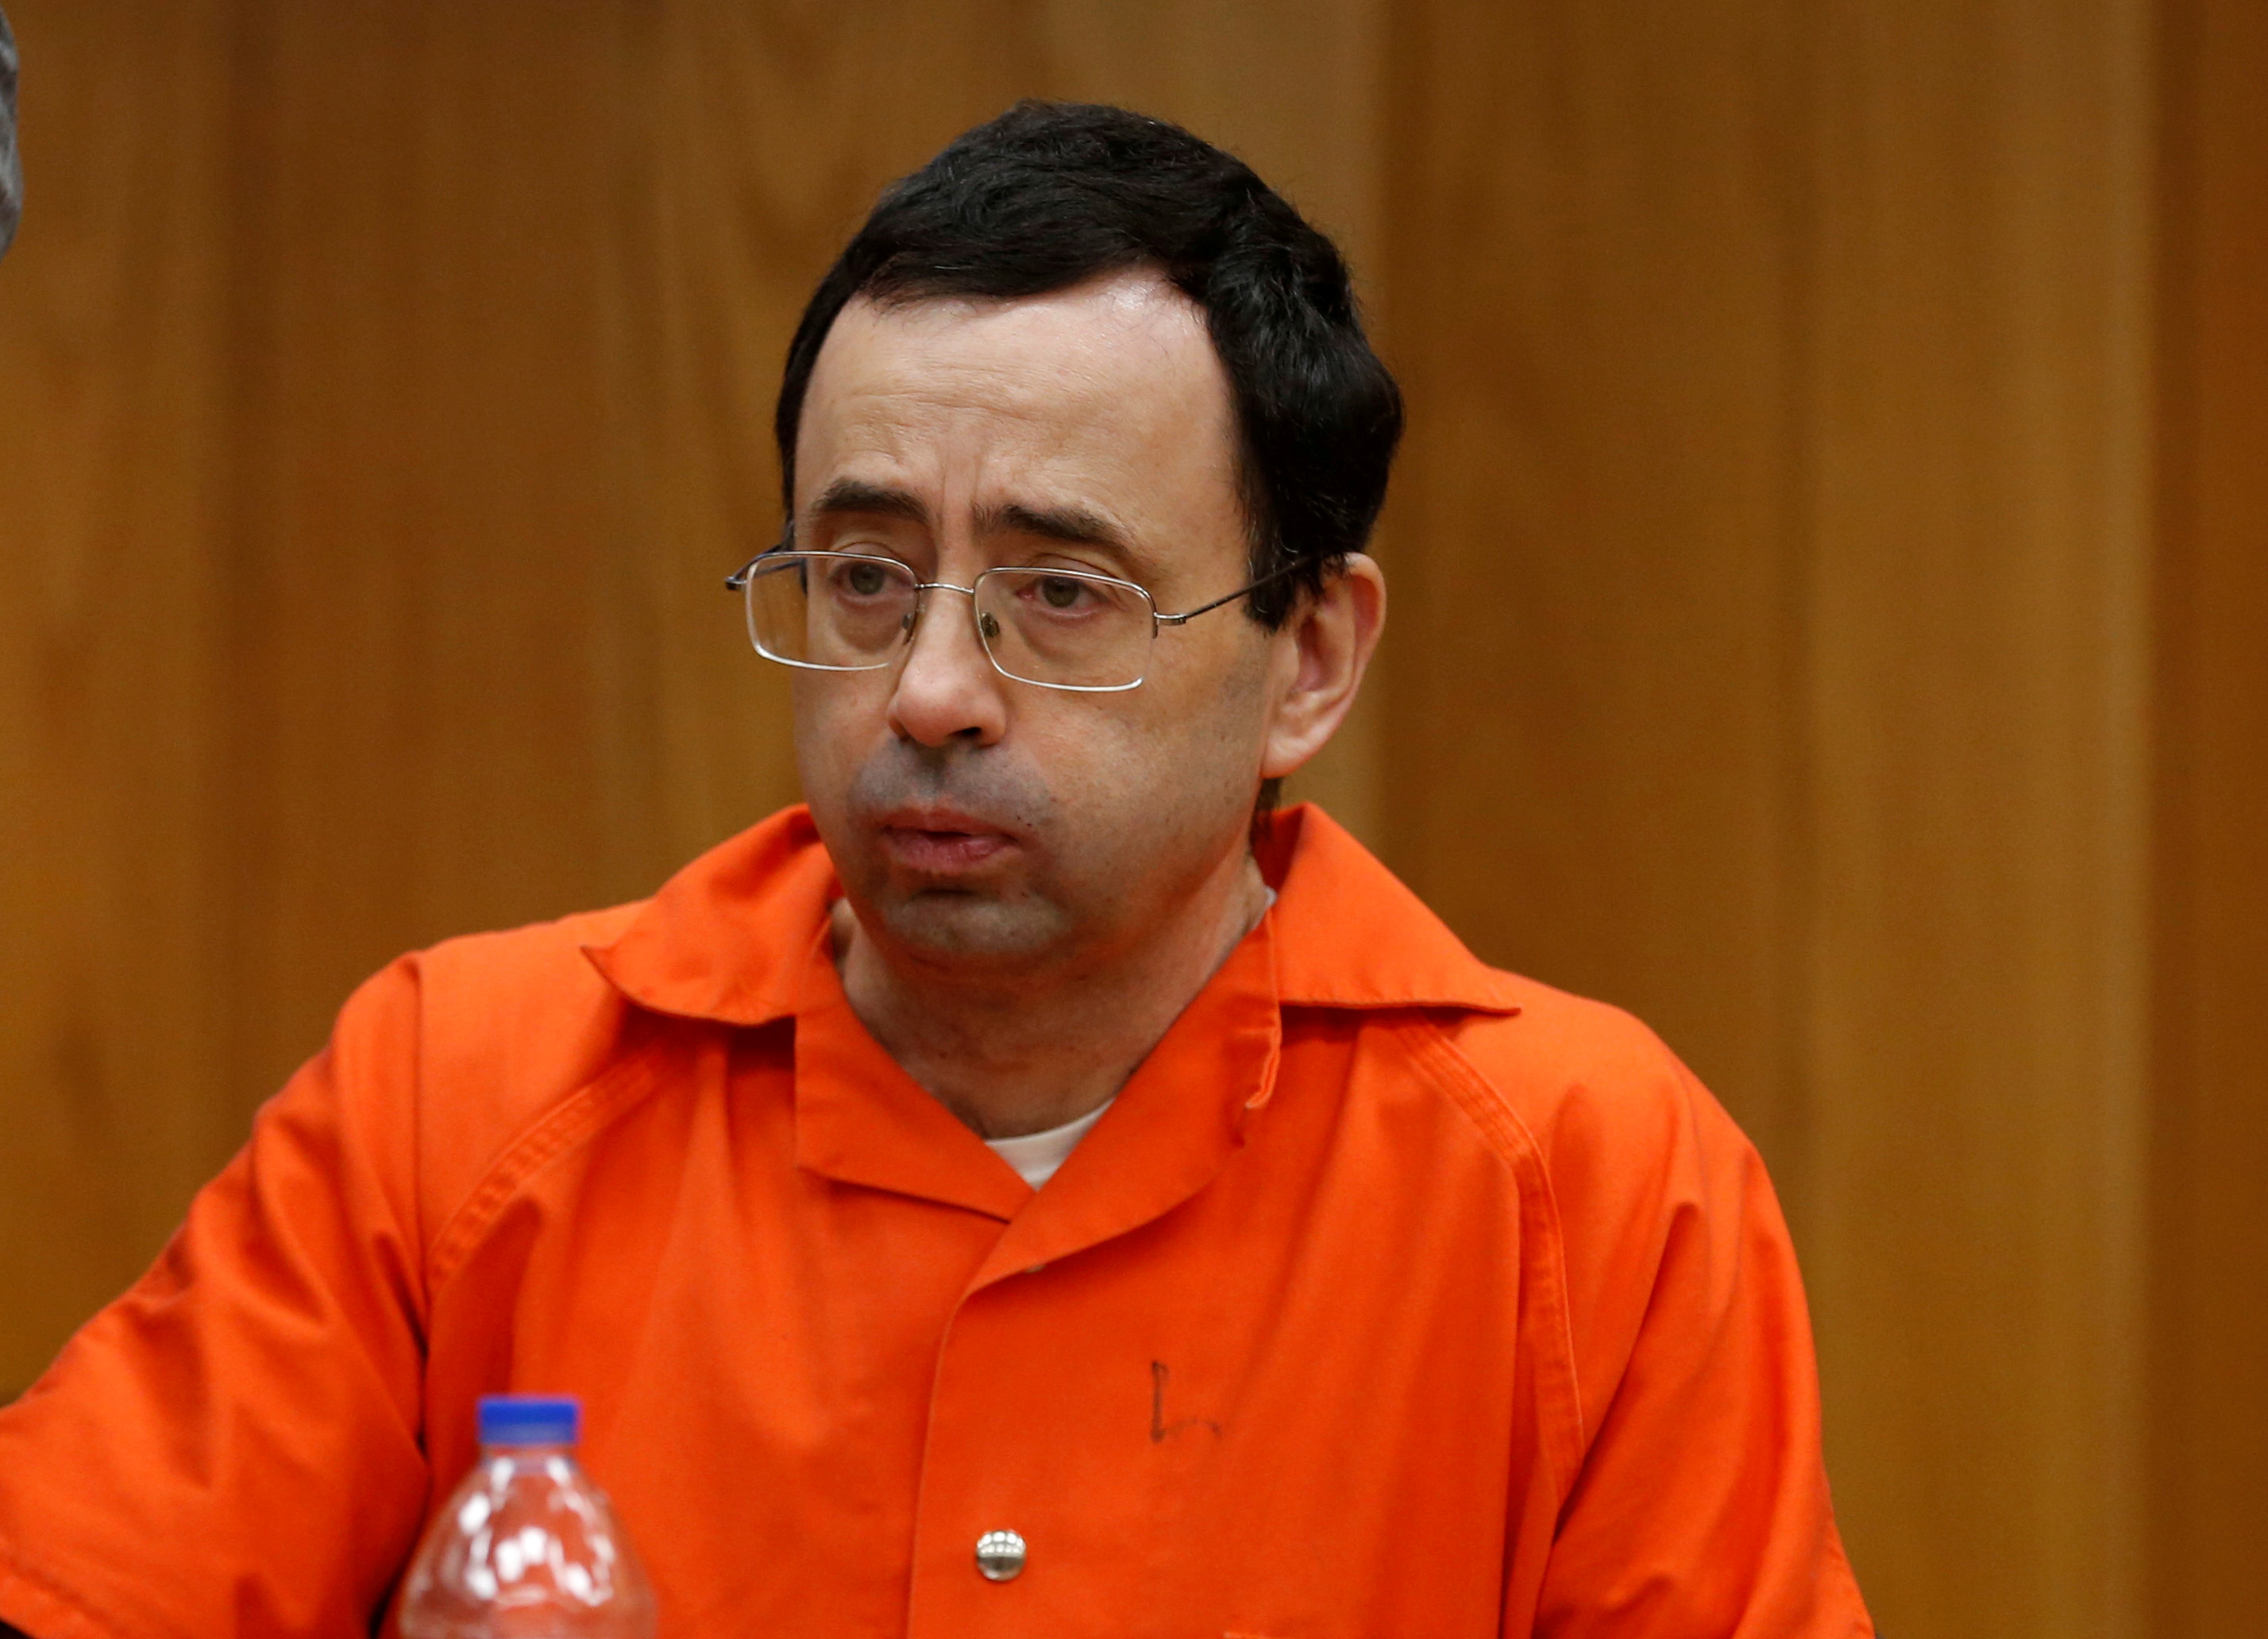 FILE PHOTO: Larry Nassar, a former team USA Gymnastics doctor who pleaded guilty in November 2017 to sexual assault charges, sits in the courtroom during his sentencing hearing in the Eaton County Court in Charlotte, Michigan, U.S., February 2, 2018.   REUTERS/Rebecca Cook/File Photo